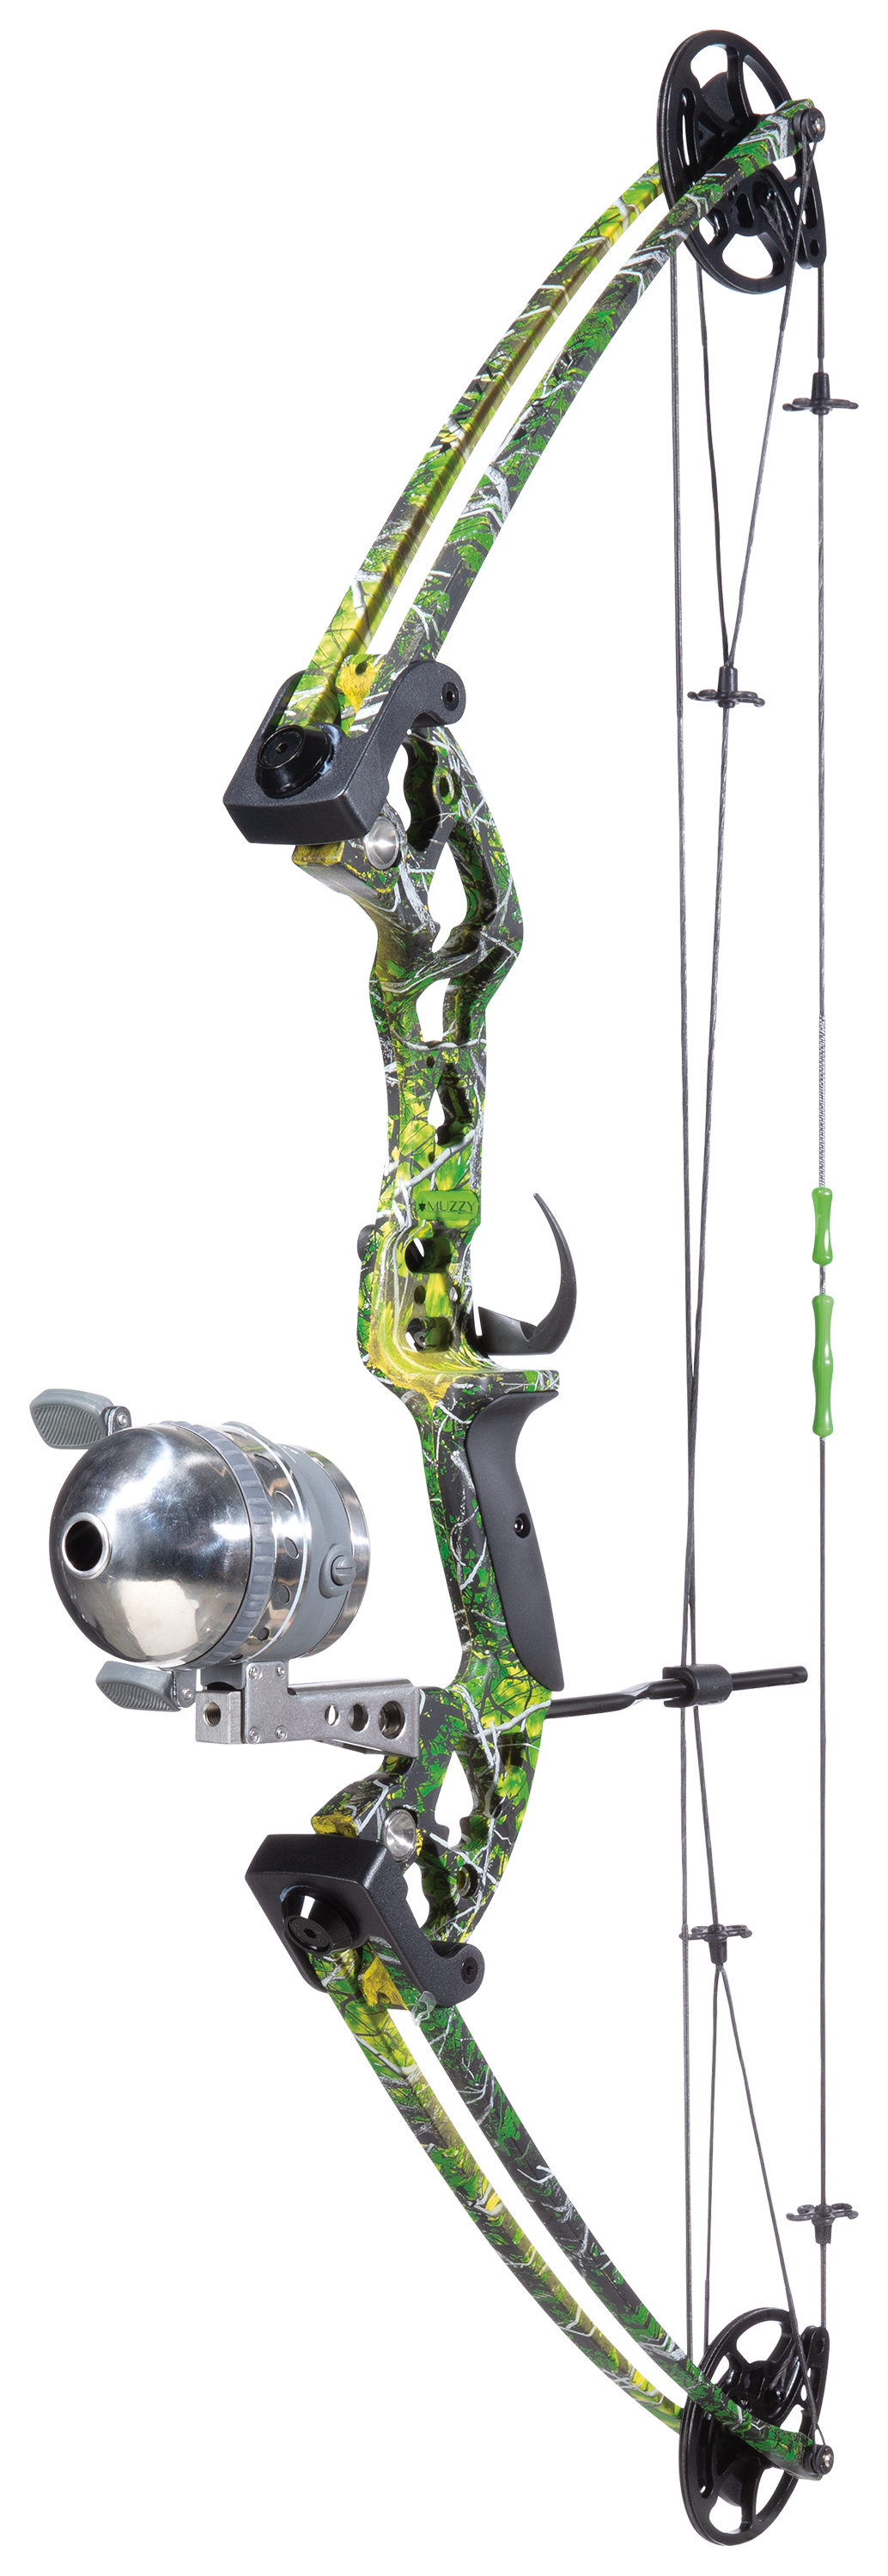 Muzzy Bowfishing Vice Compound Bow Package